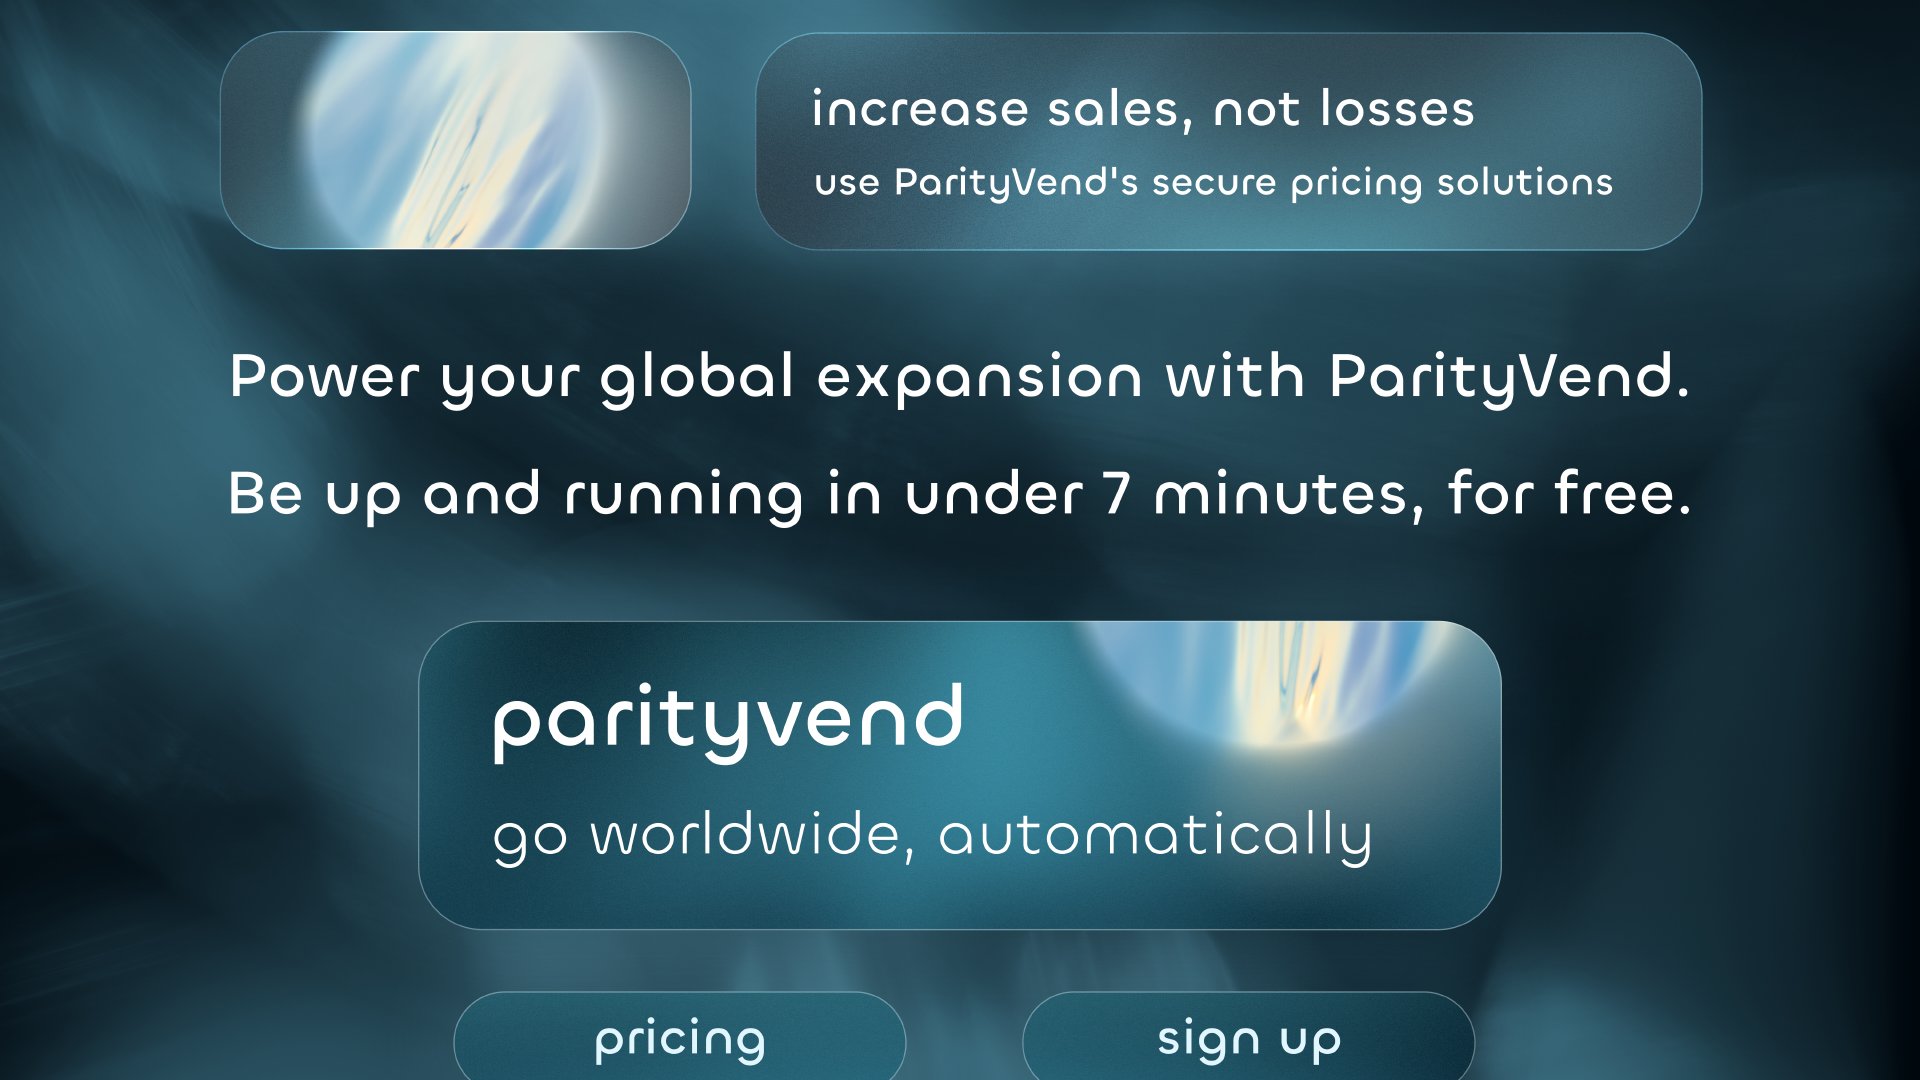 Increase sales, not losses. Use ParityVend's secure pricing solutions. Be up and running in under 7 minutes for free. ParityVend: Go worldwide automatically. Pricing | Sign Up.